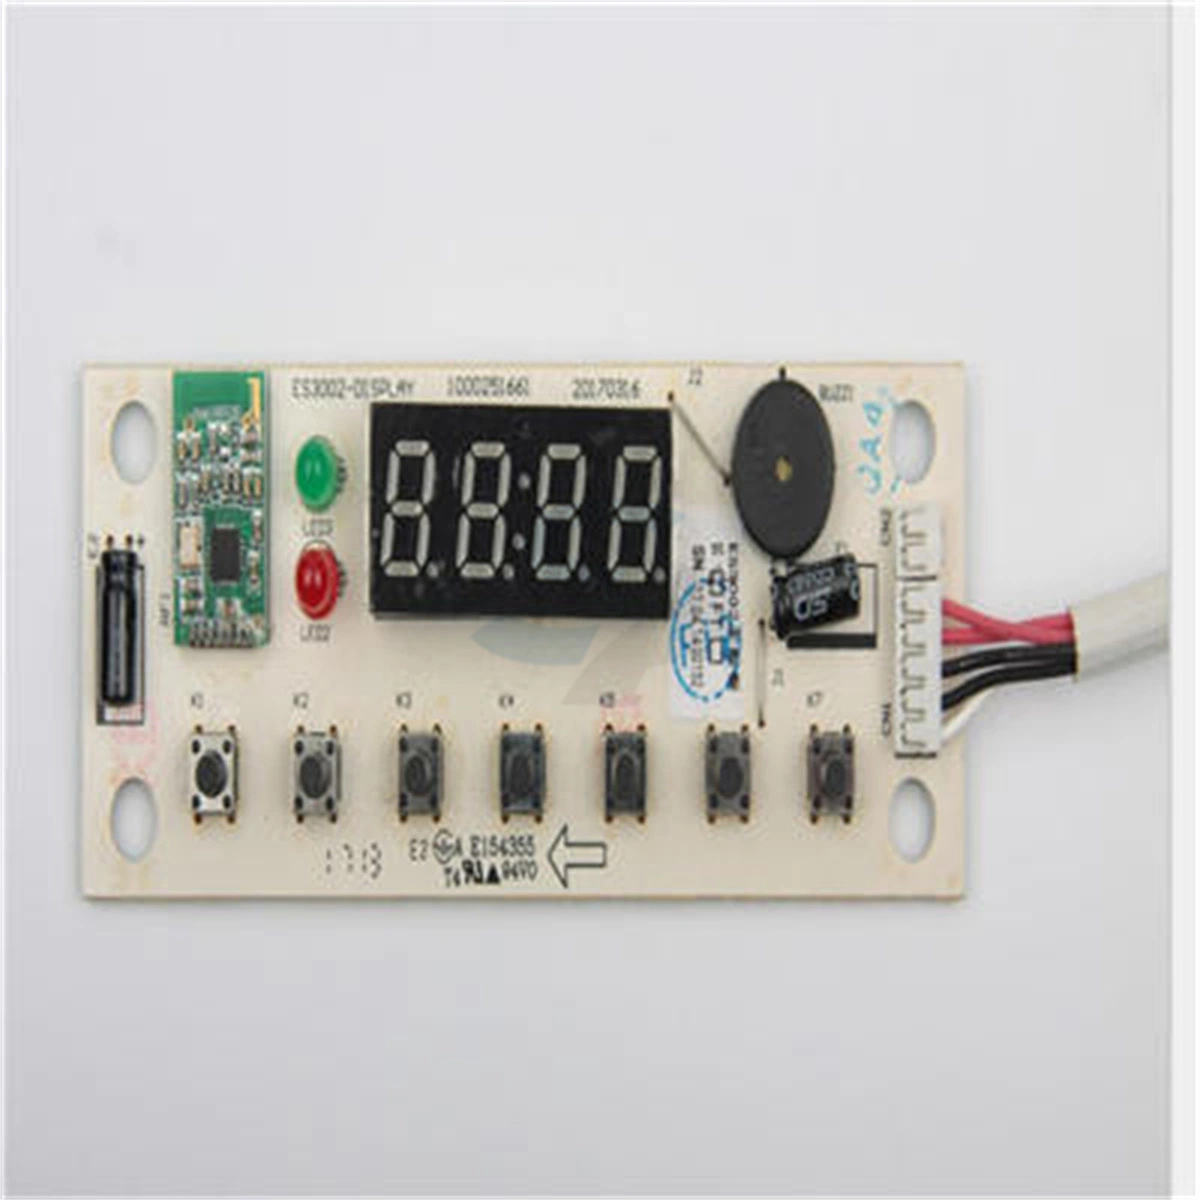 Oven Power Supply Controller Kitchen Appliance